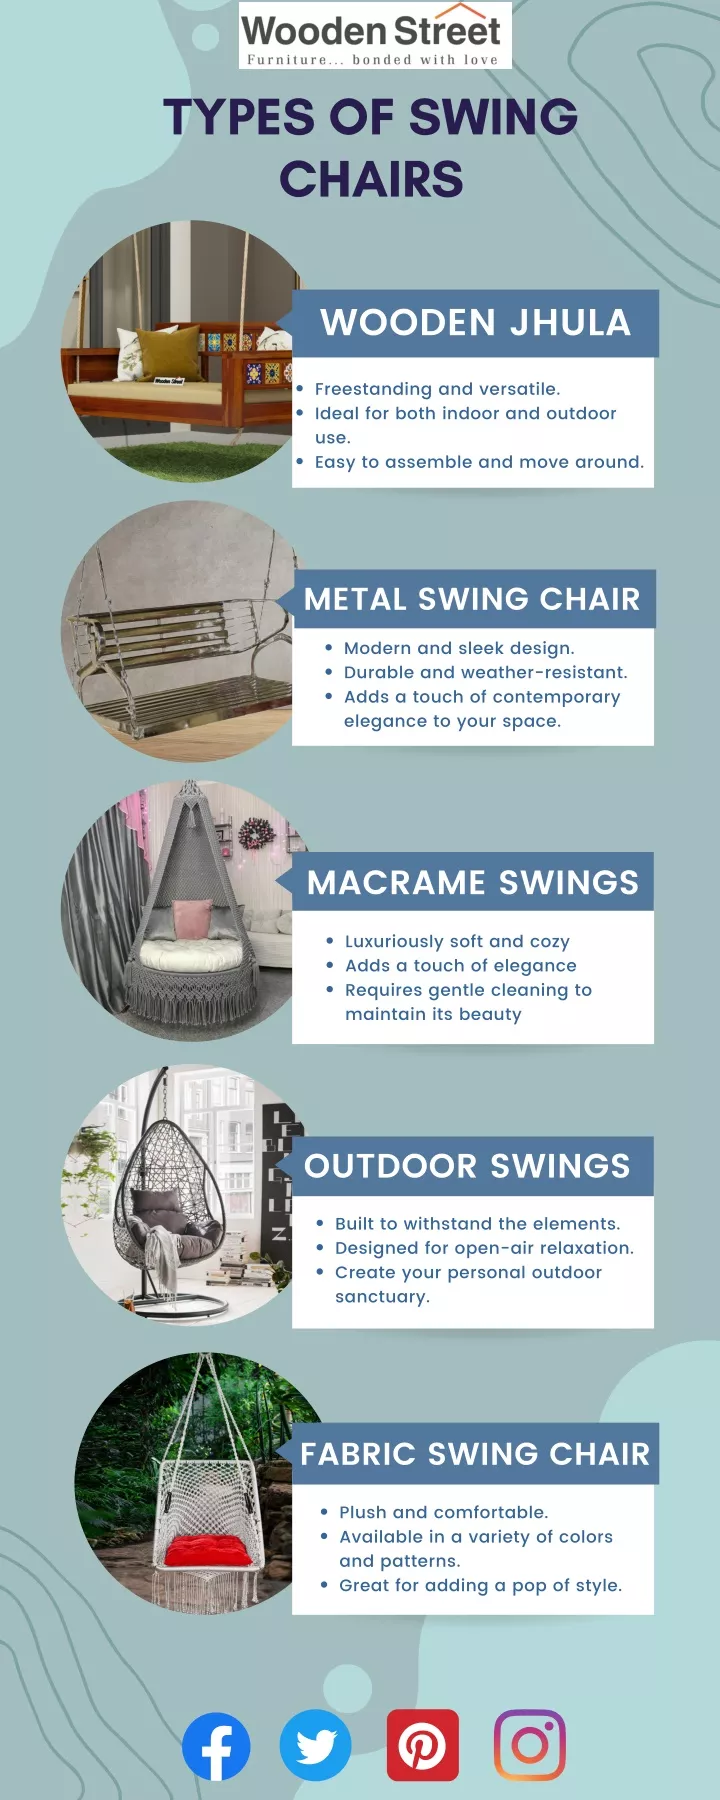 types of swing chairs